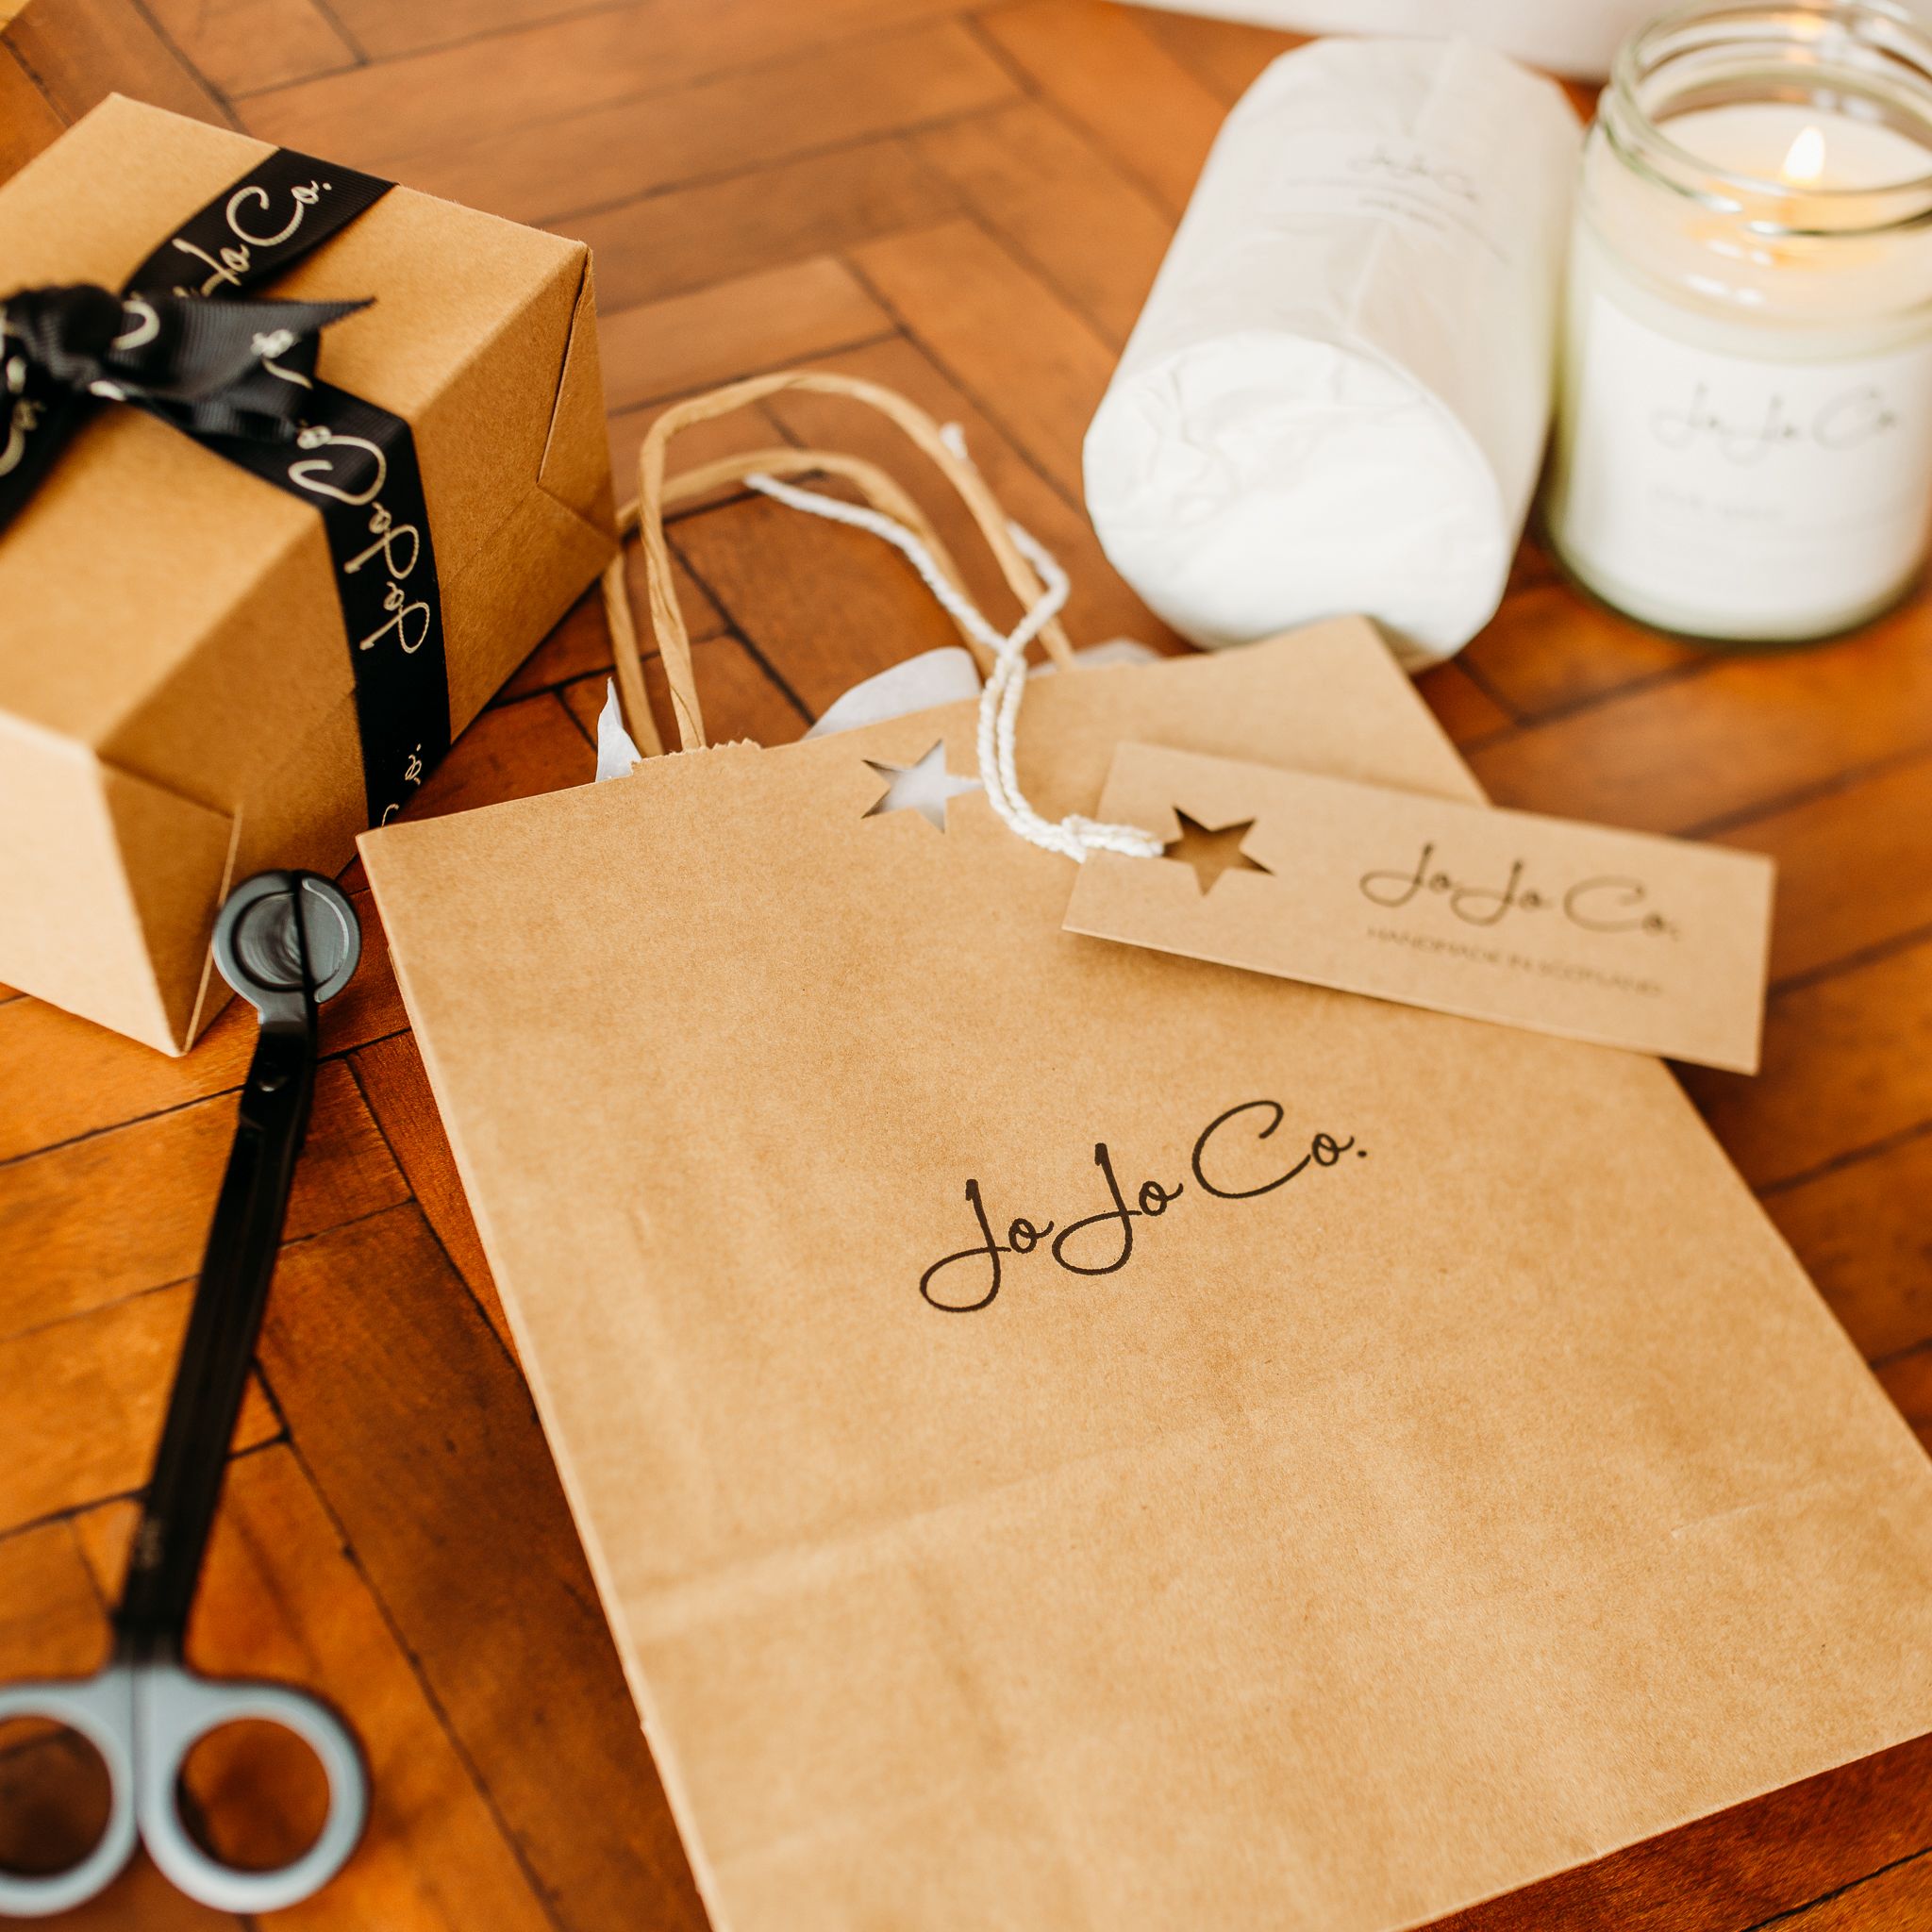 JoJo Co gift bag and tag, with candles wrapped in tissue paper in the background